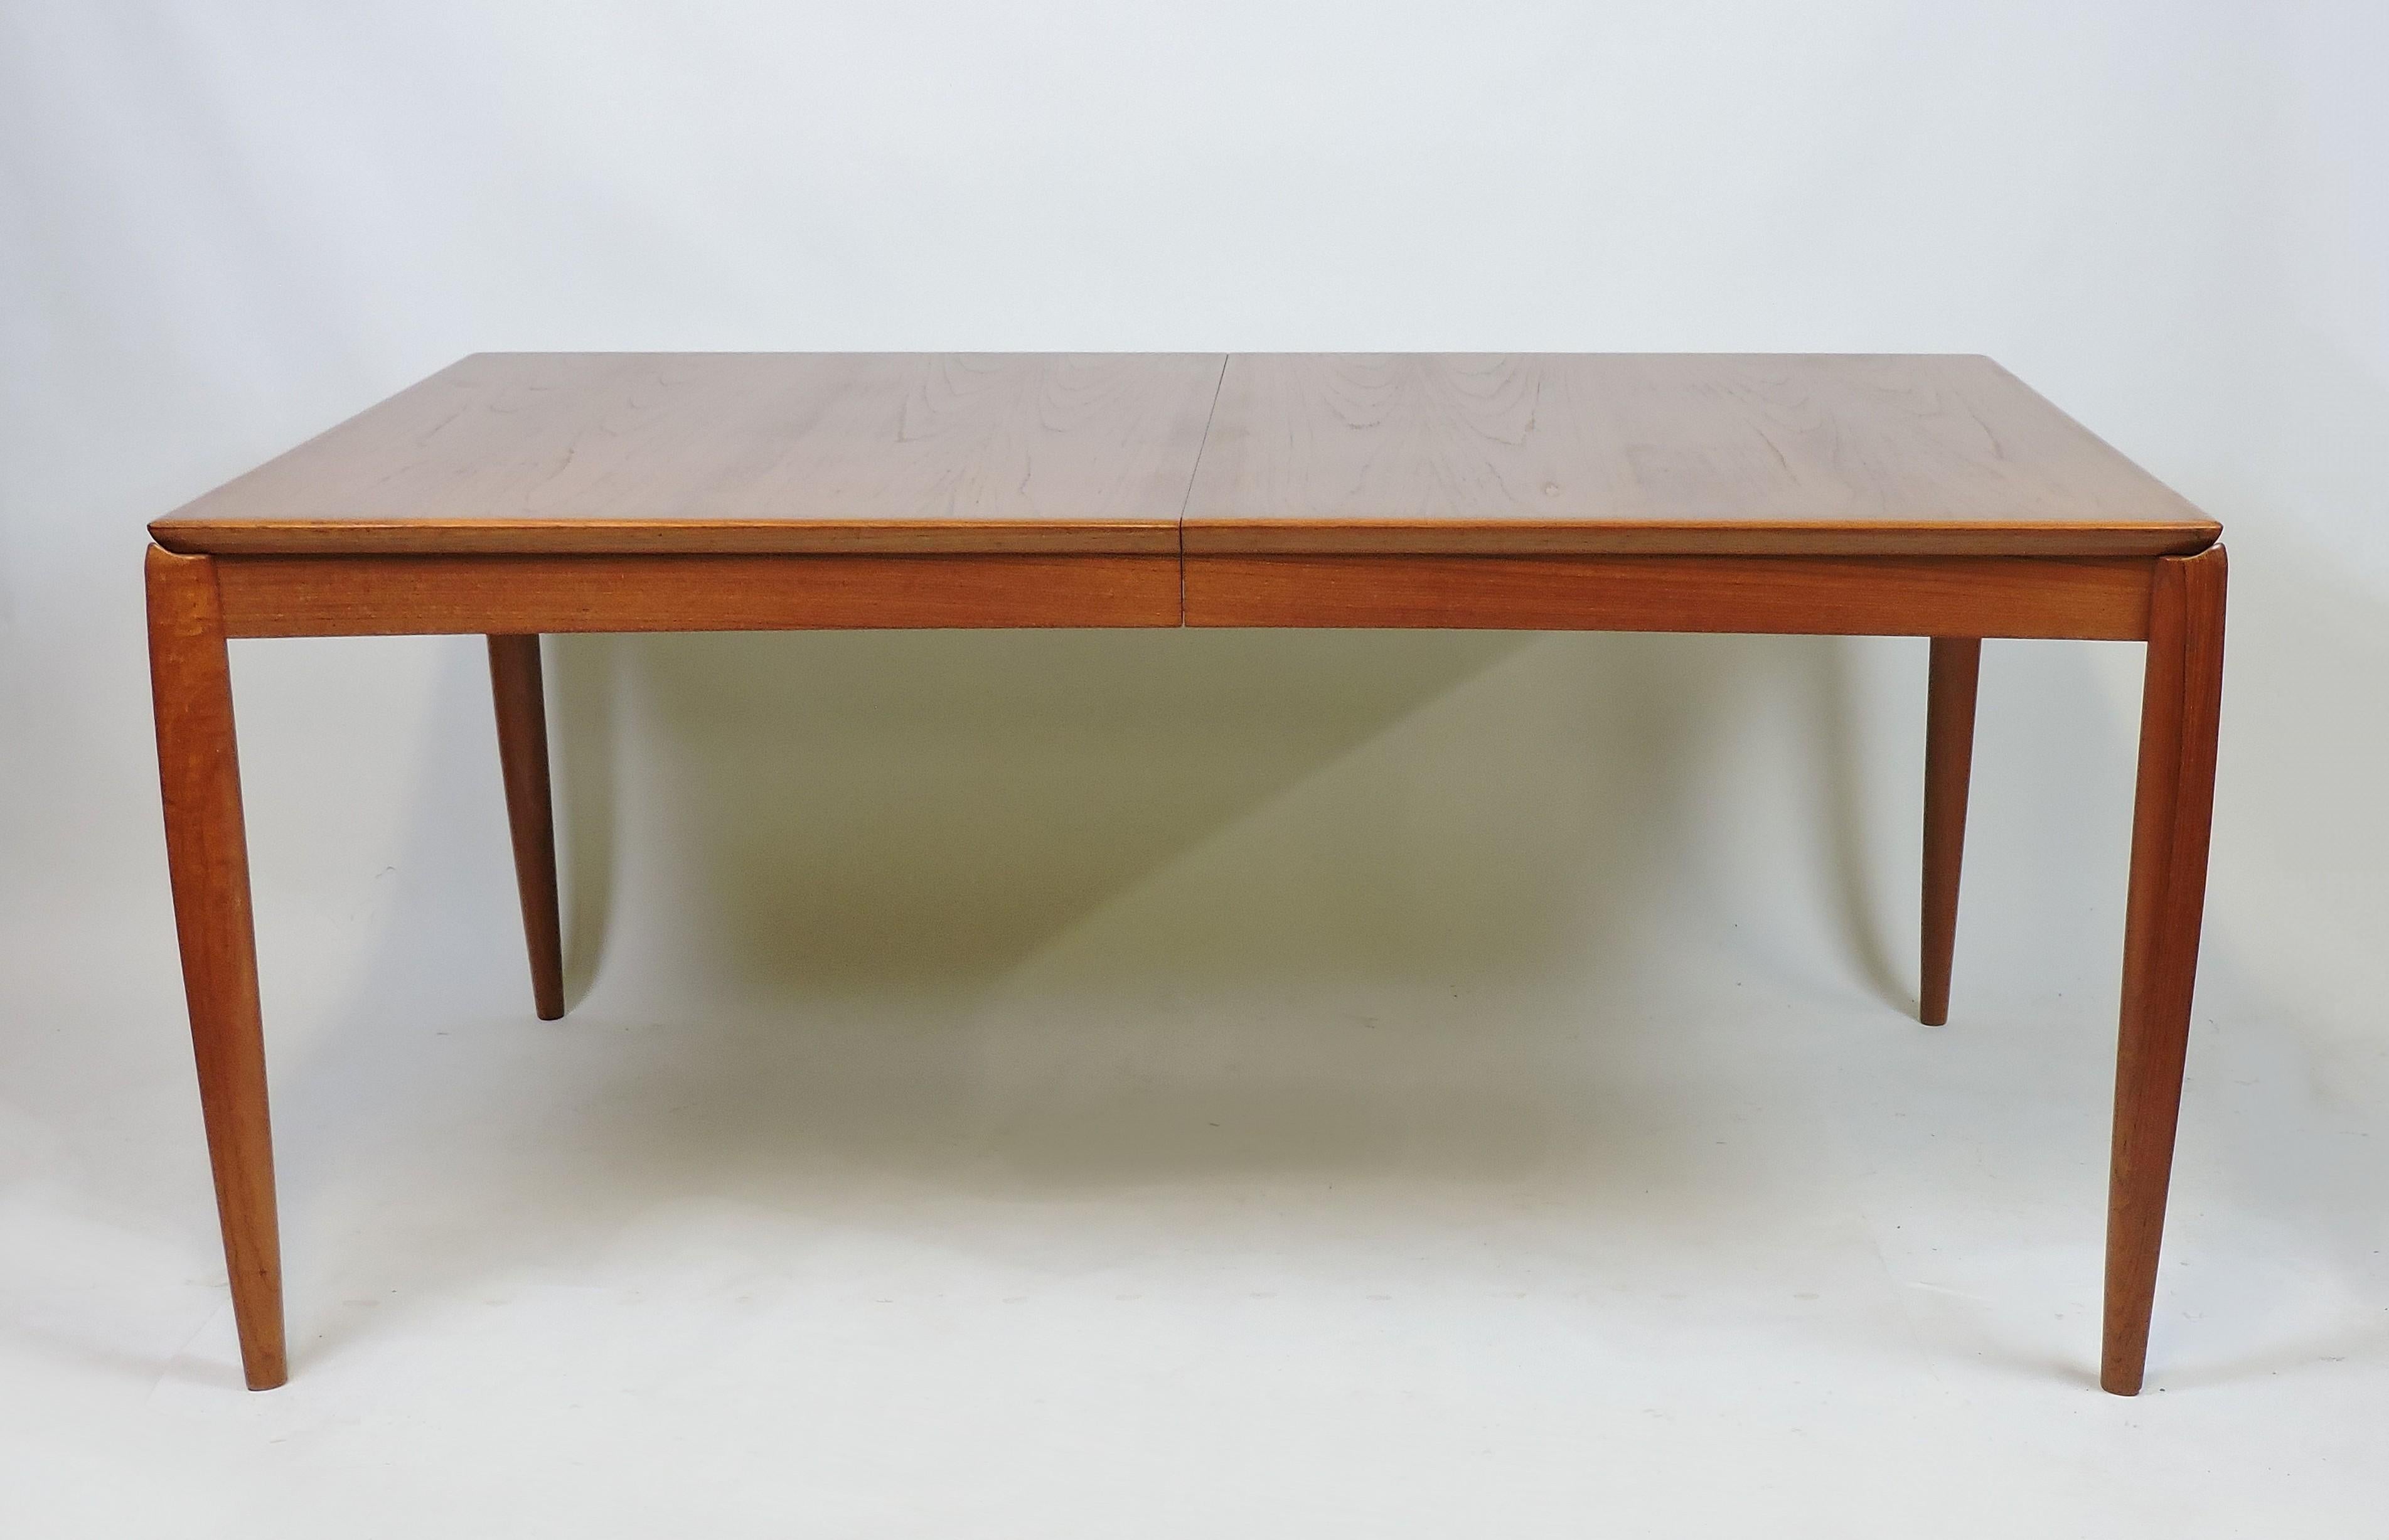 Elegant dining table designed by H.W. Klein and manufactured in Denmark by Bramin. This table has sculpted solid teak legs along with beautiful wood grain and color. A self-storing leaf allows it to extend from 63 1/4 inches to a nice size of 87